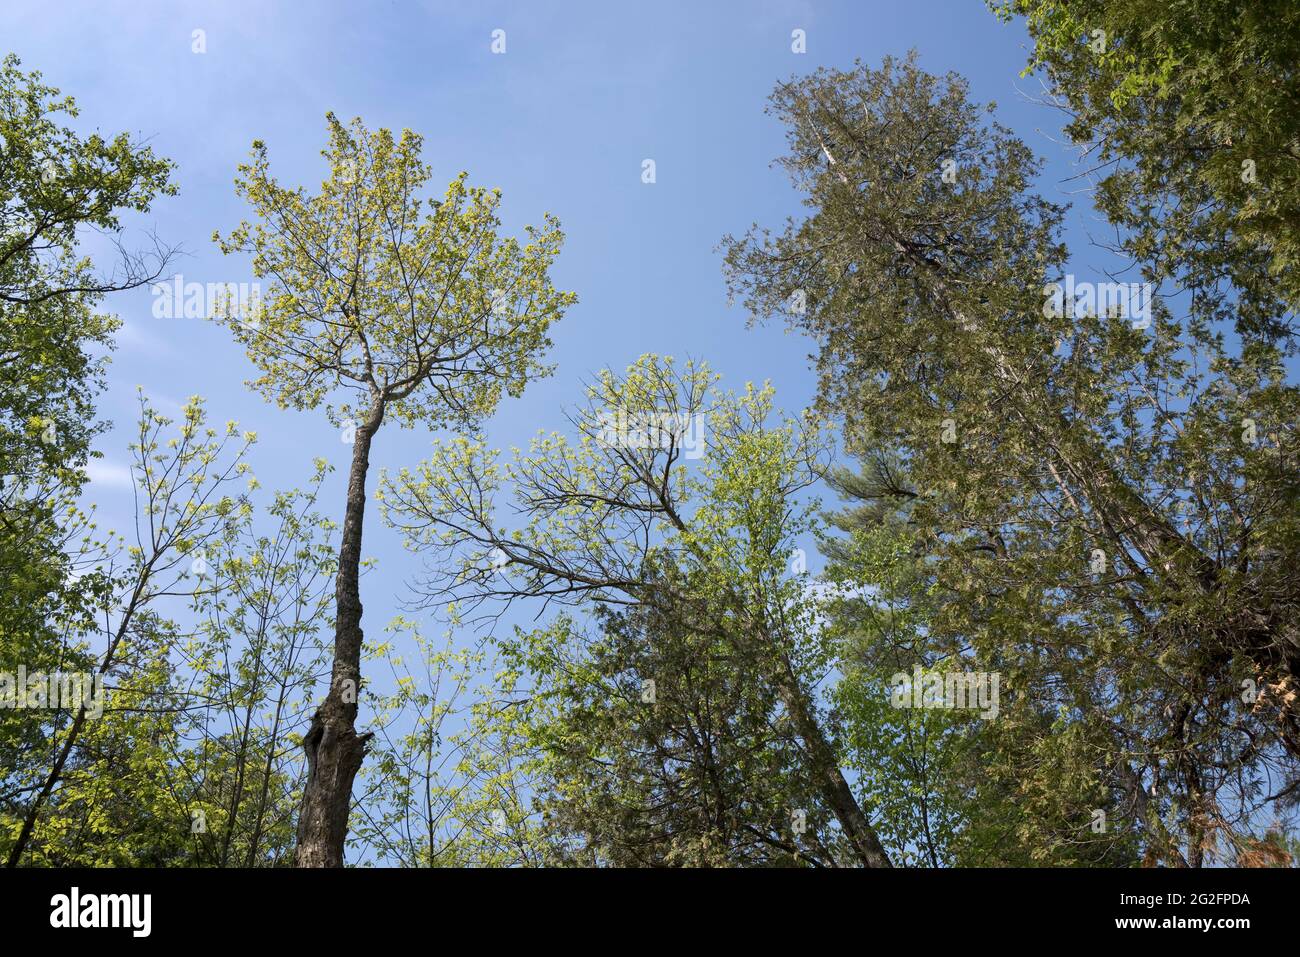 Upward view of tall trees in Wisconsin forest. Stock Photo